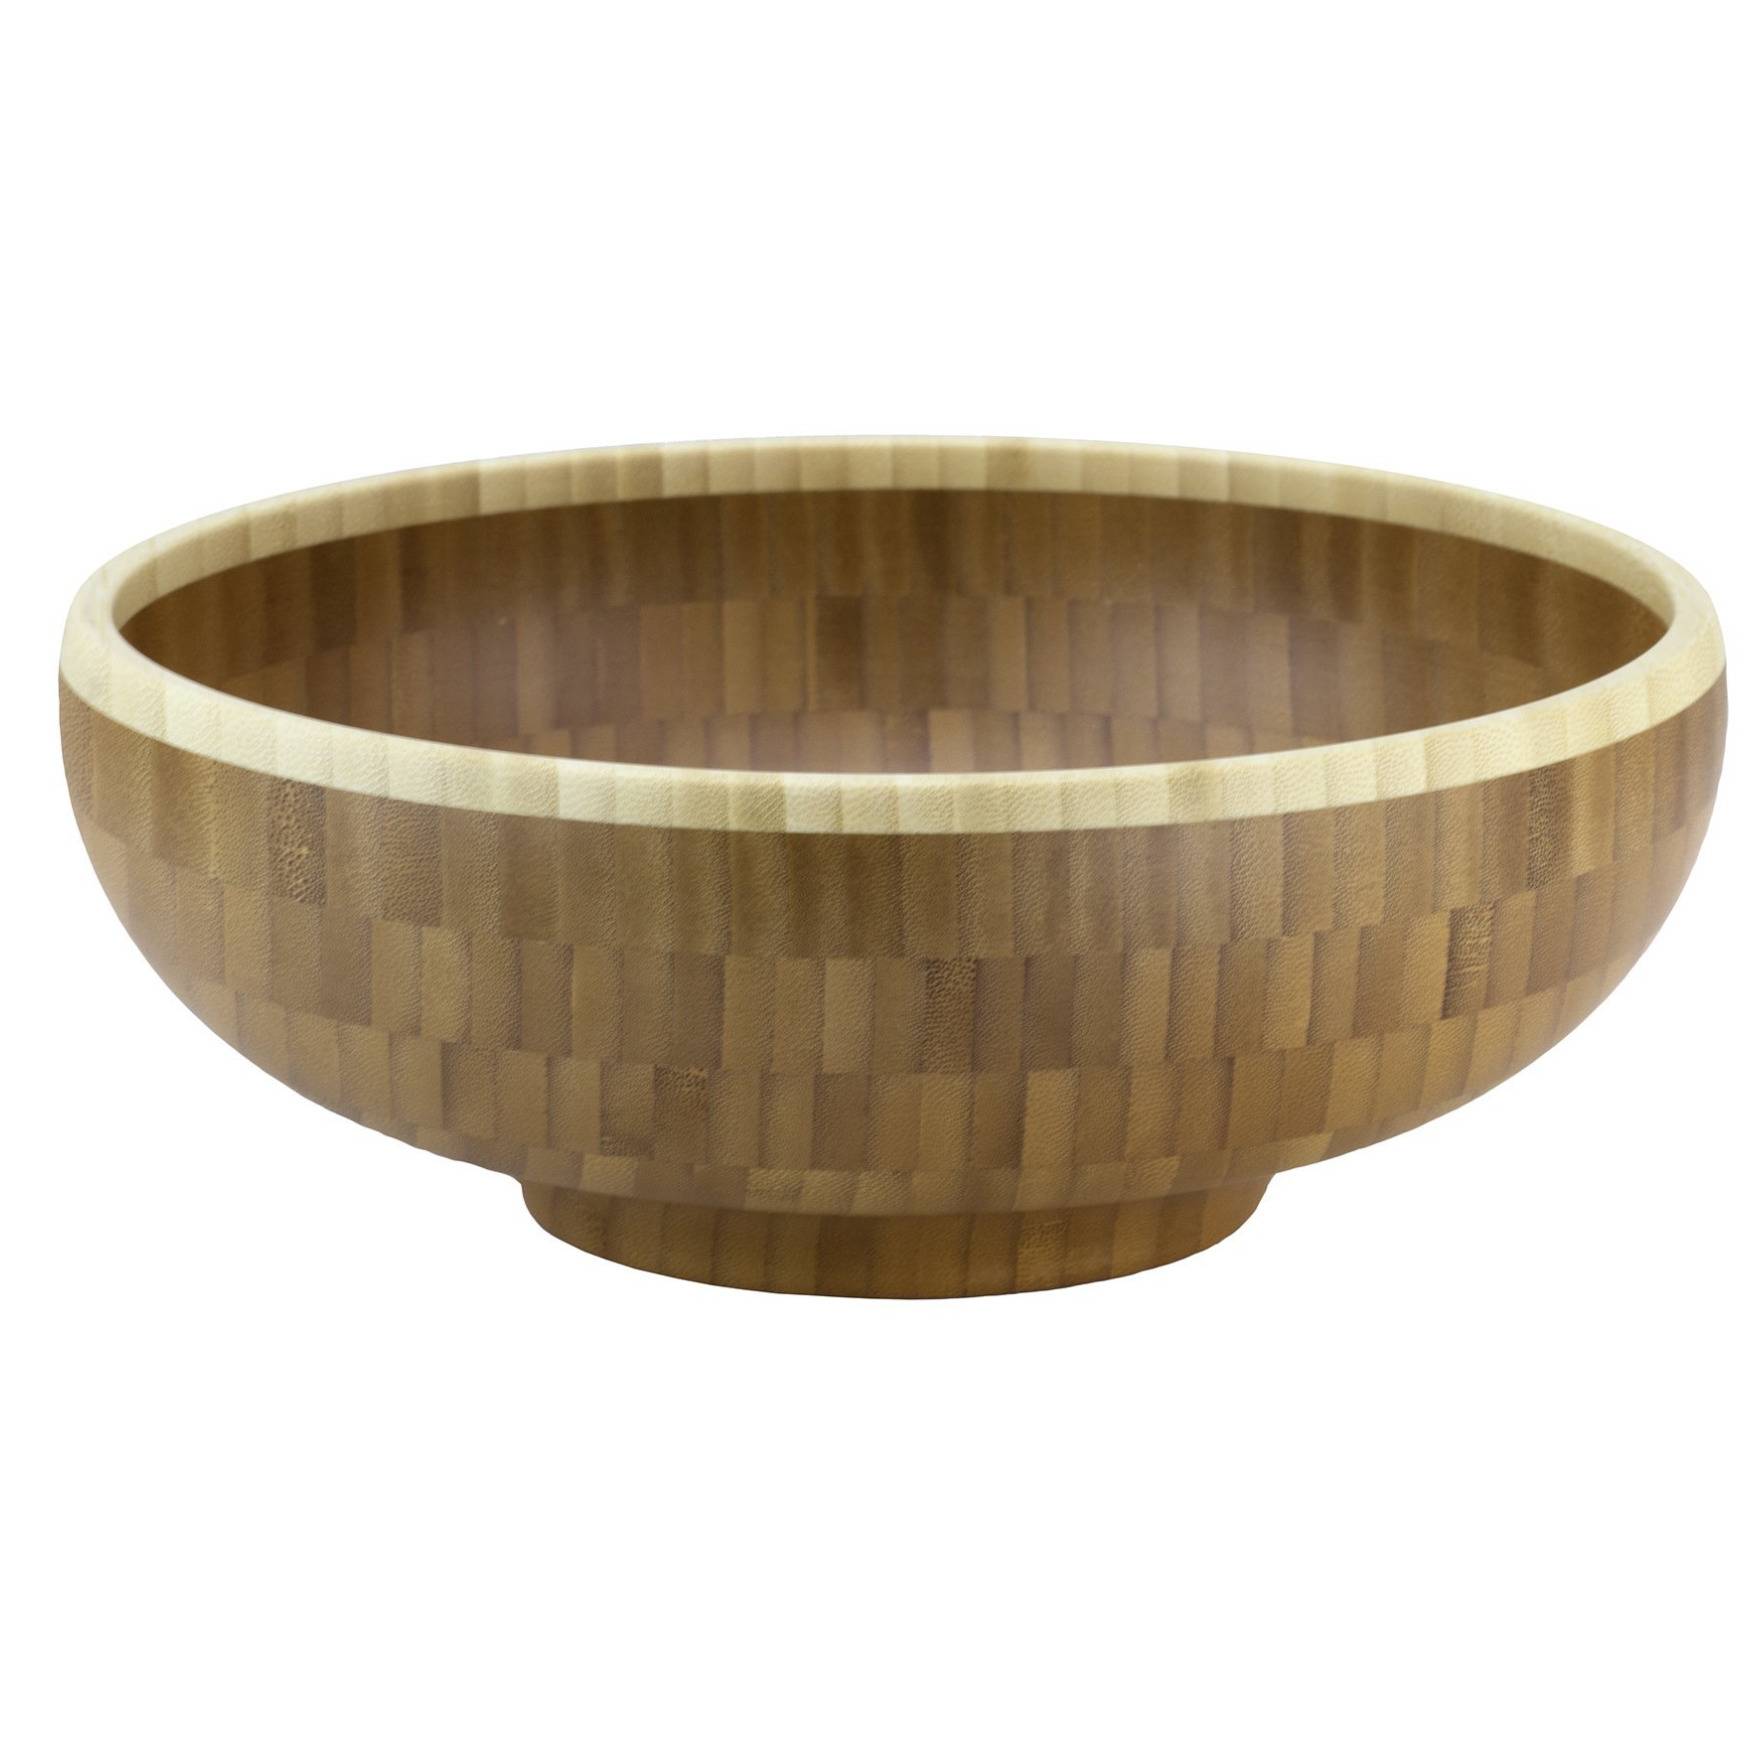 Totally Bamboo Classic serving Bowl (12")